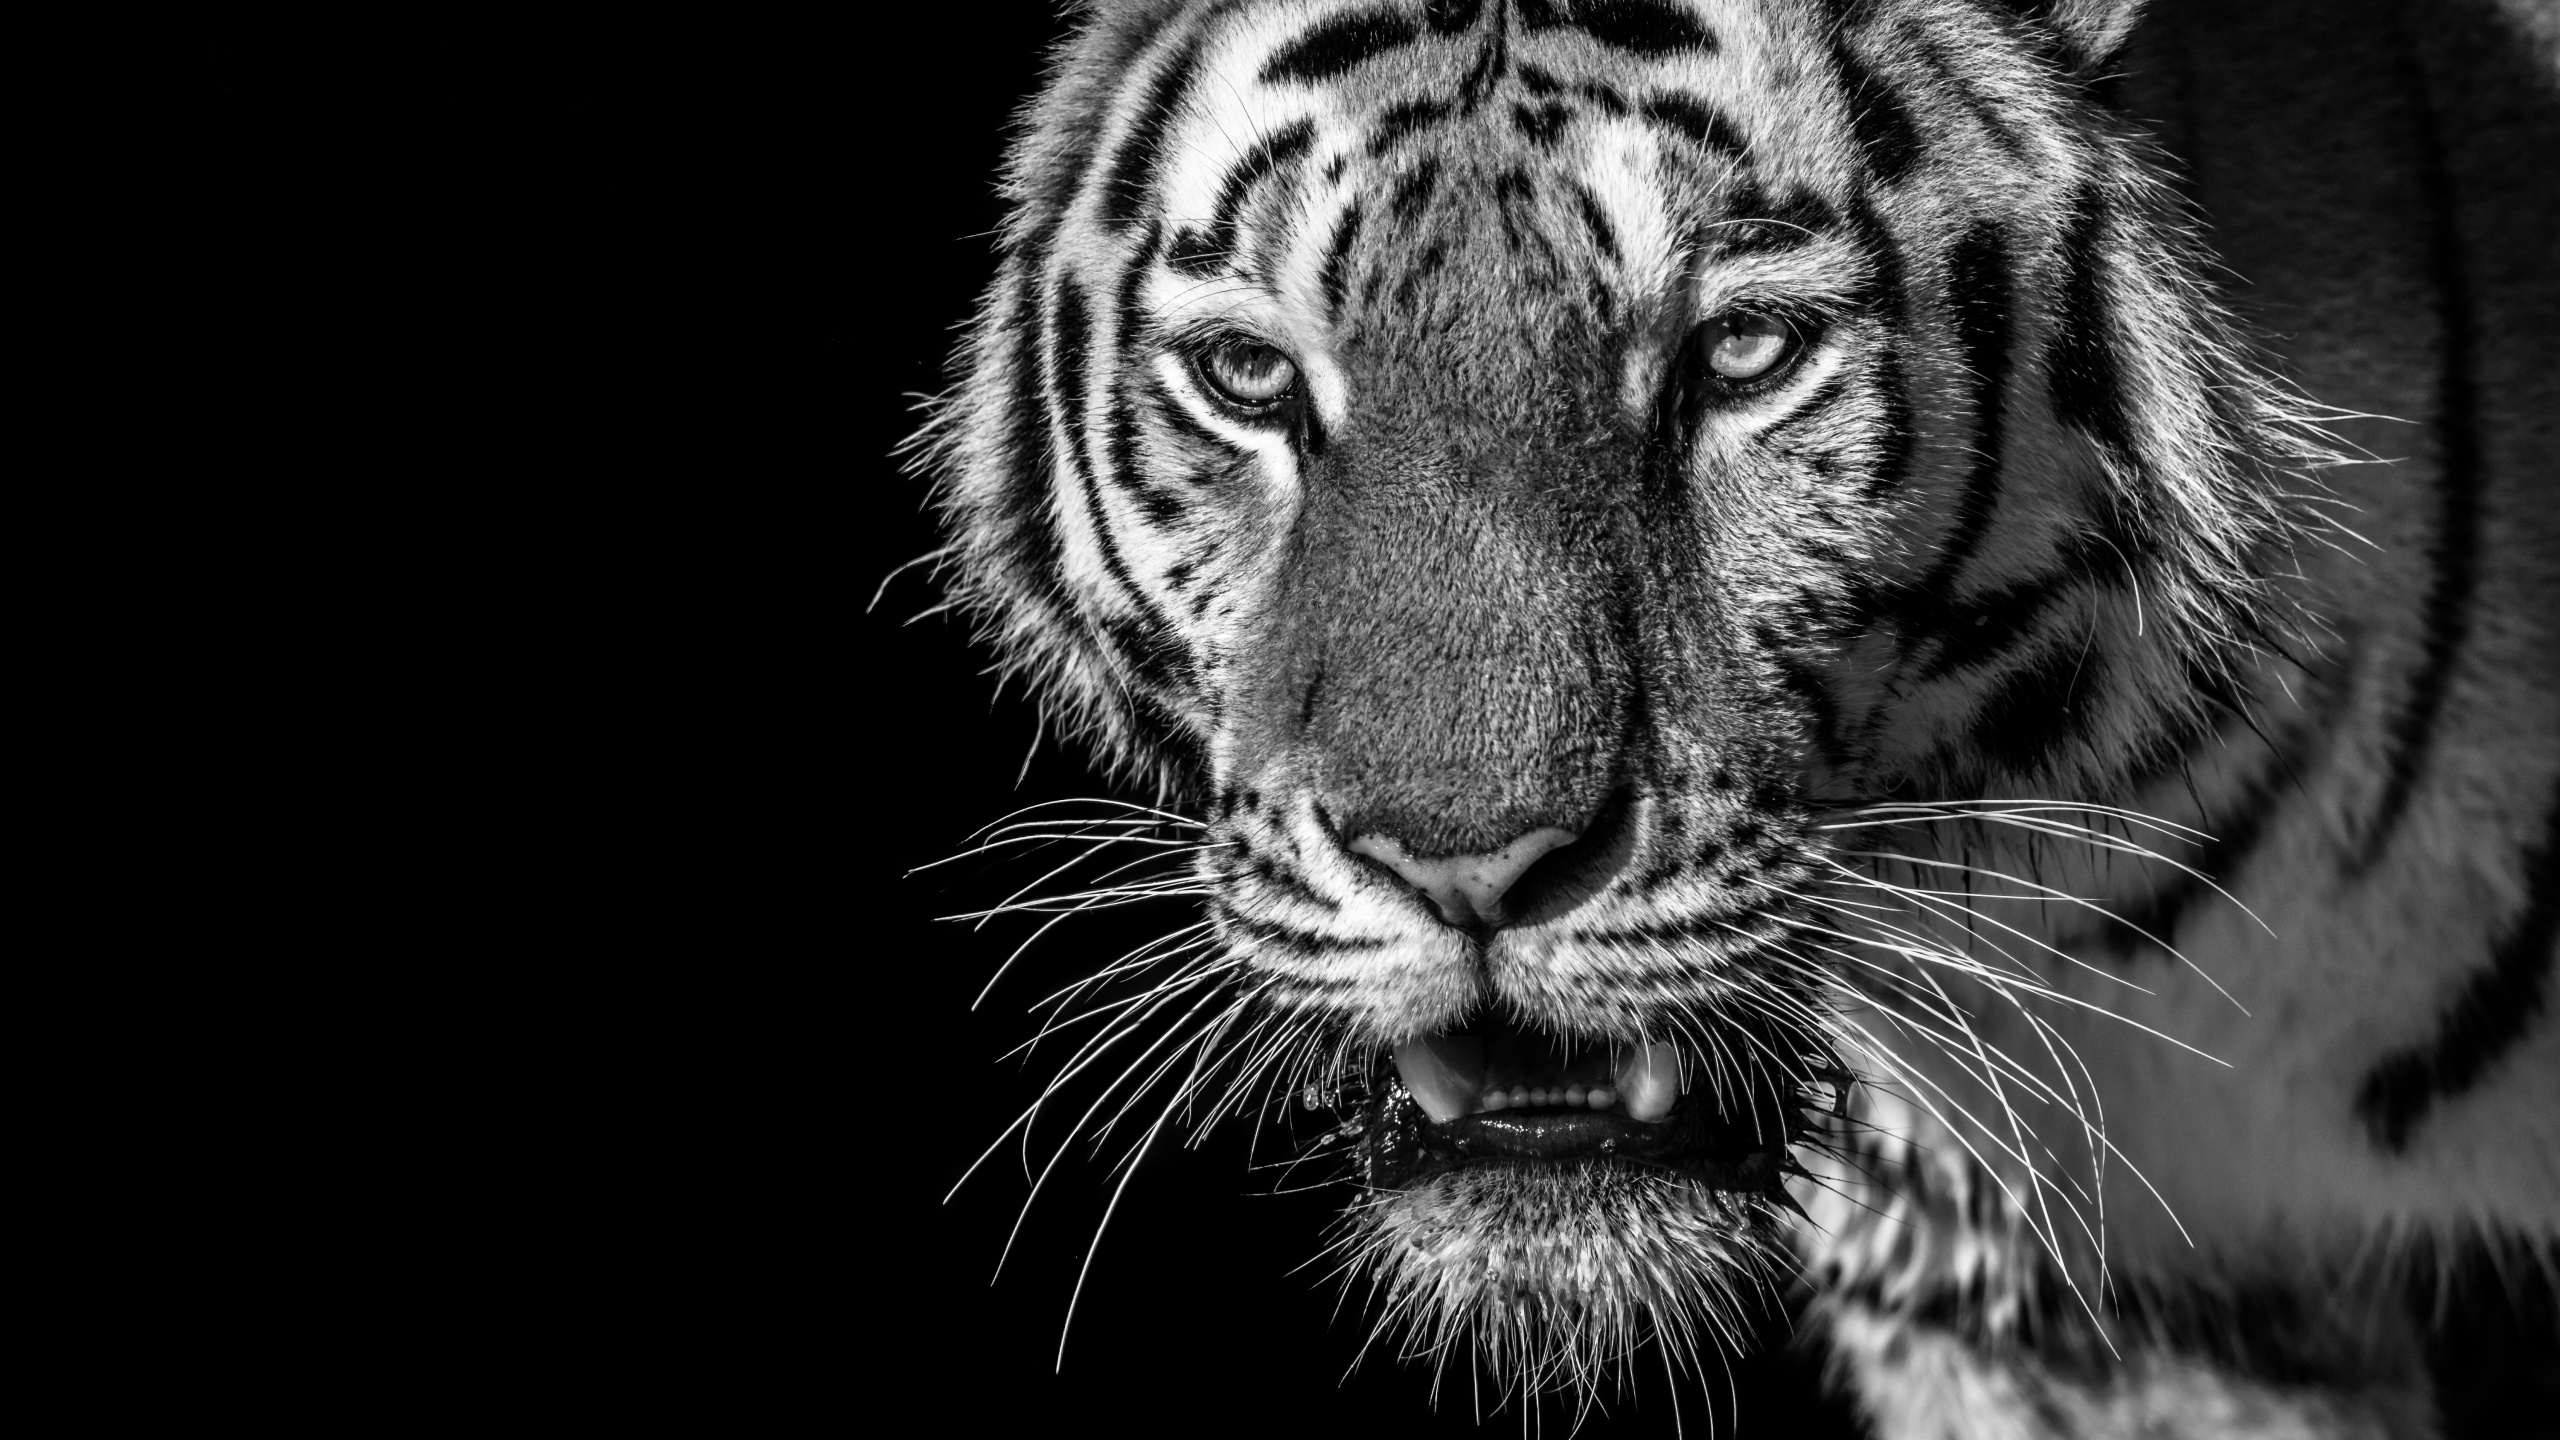 White and Black Tiger Illustration. Wallpaper in 2560x1440 Resolution